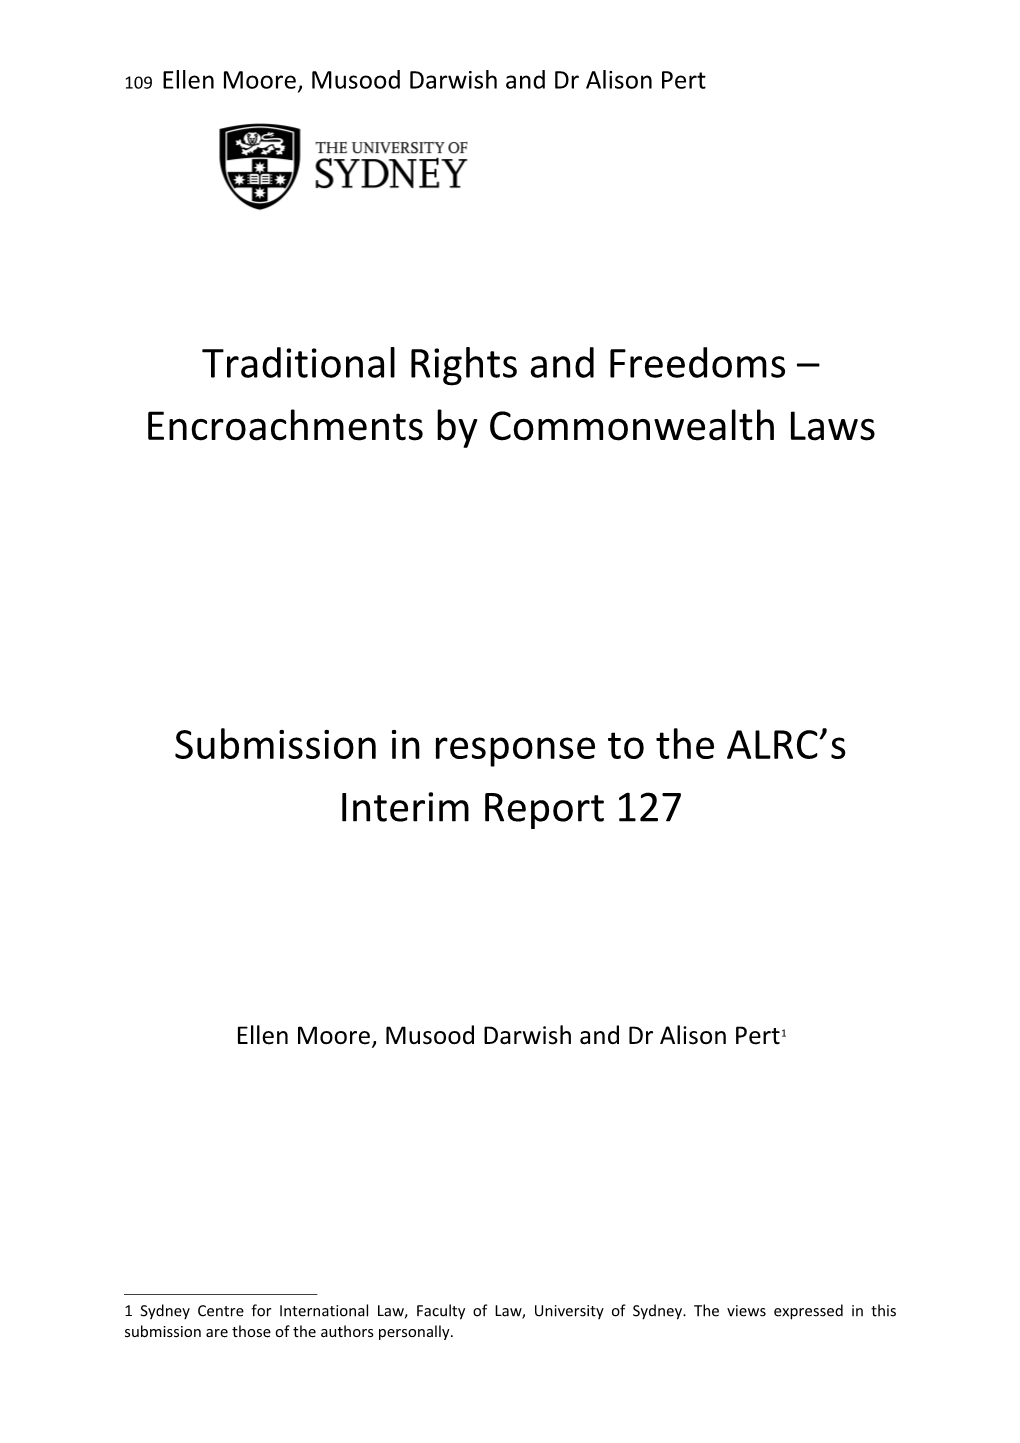 Traditional Rights and Freedoms Encroachments by Commonwealth Laws